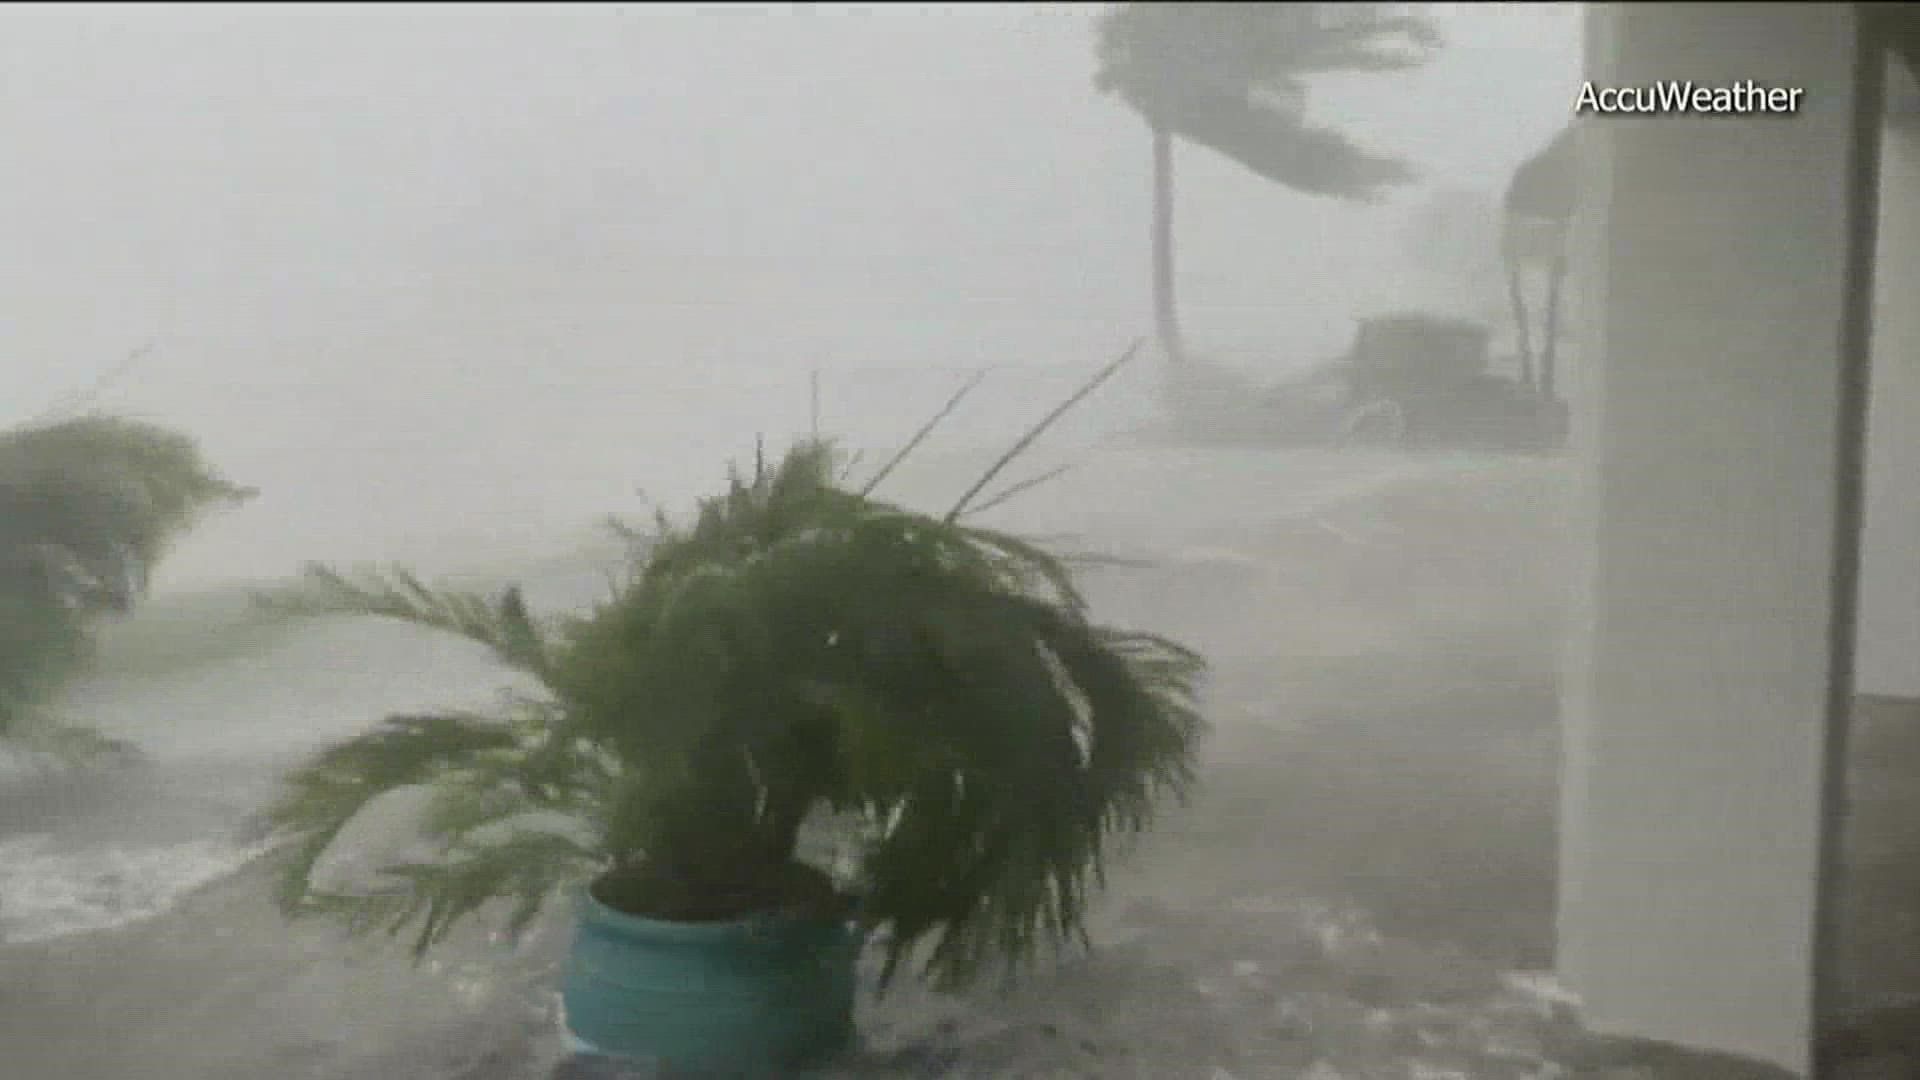 The Category 4 hurricane made landfall near Ft. Myers with 155 mph wind.